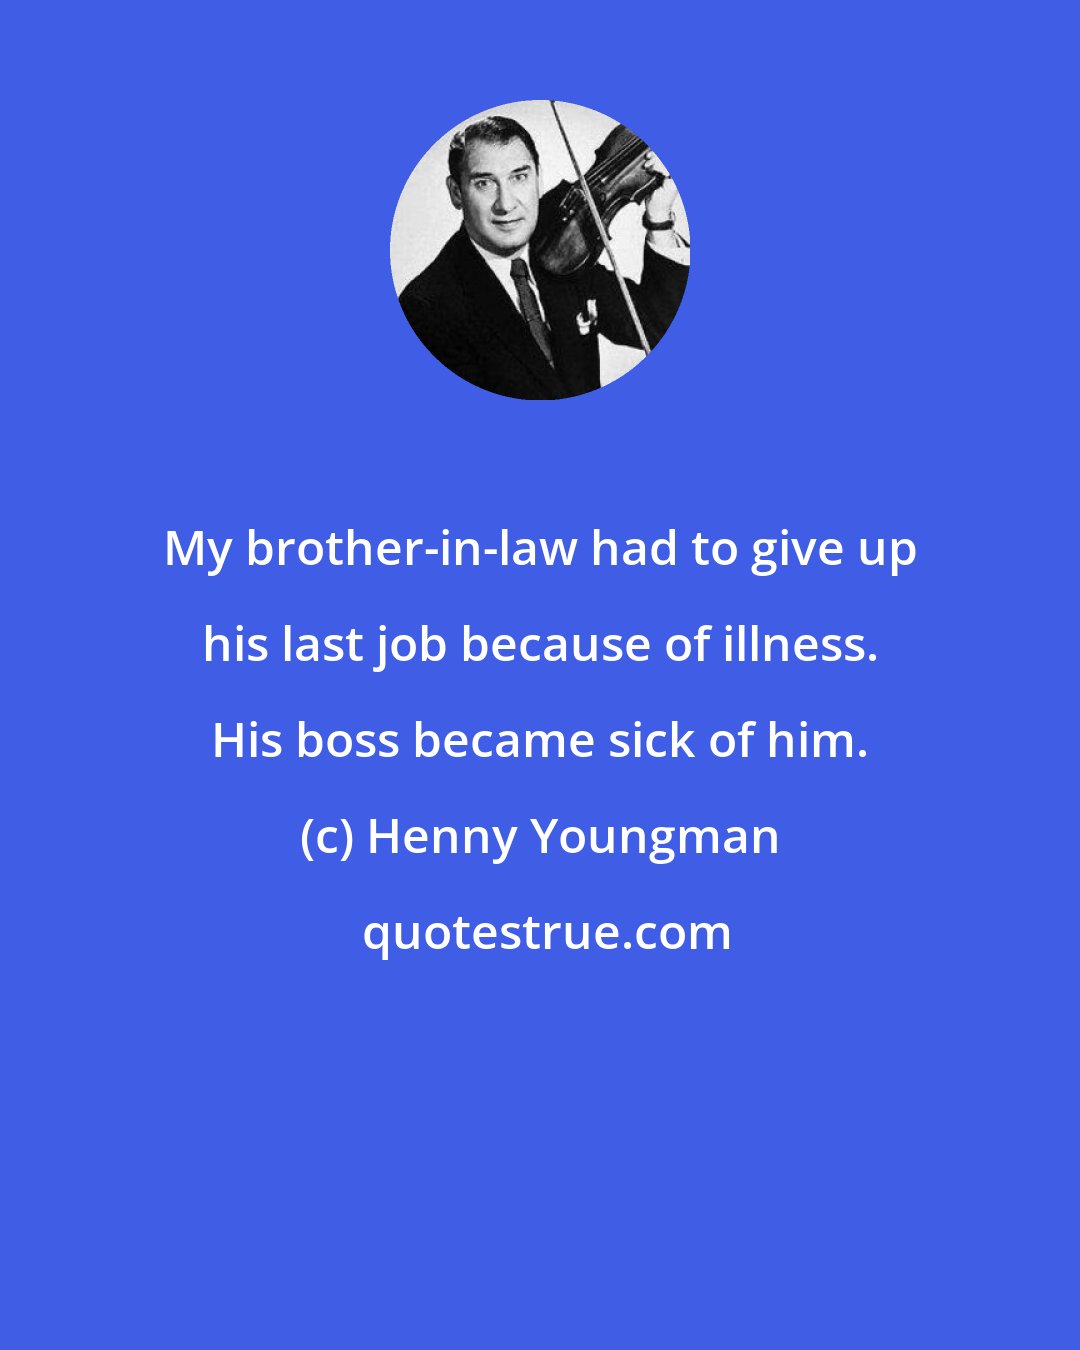 Henny Youngman: My brother-in-law had to give up his last job because of illness. His boss became sick of him.